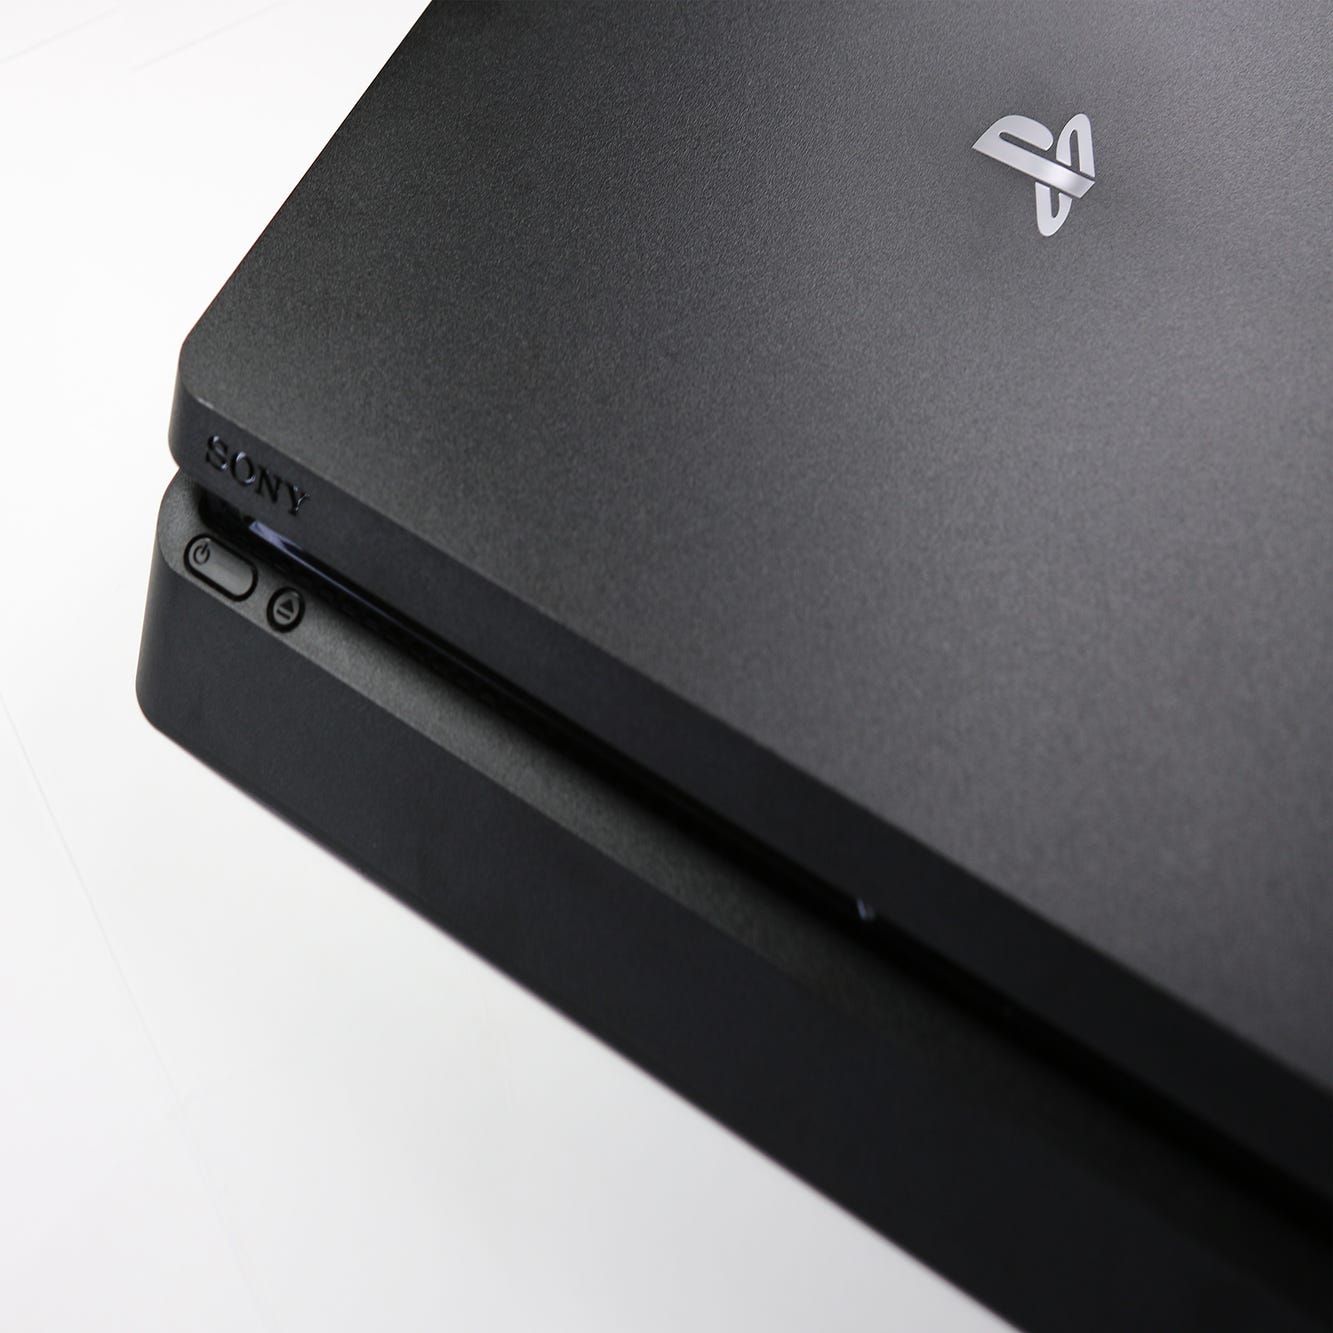 Digital Foundry: Hands-on with the CUH-2000 PS4 Slim